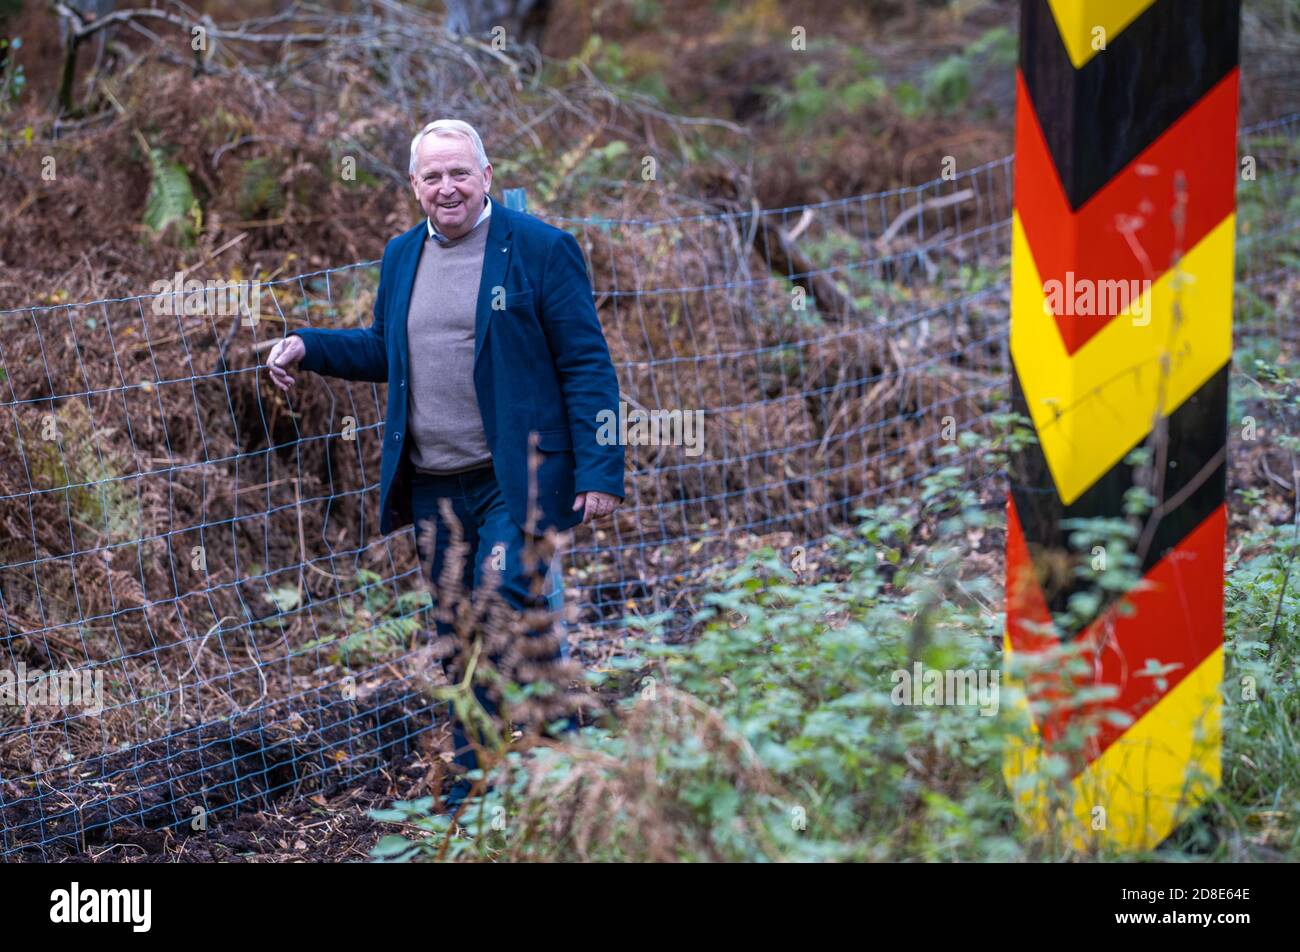 22 October 2020, Mecklenburg-Western Pomerania, Korswandt: Till Backhaus (SPD), the Minister of Agriculture of Mecklenburg-Vorpommern, is standing at the border between Poland and Germany at the new protective fence to guard against swine fever. A metal fence is to prevent the overflow of wild boars in case African swine fever (ASP) spreads along the coast. The wild boar fence to protect against swine fever at the border to Poland is halfway finished in Mecklenburg-Western Pomerania. To prevent the introduction of the animal disease, which is widespread in Poland, the state is erecting the 62. Stock Photo